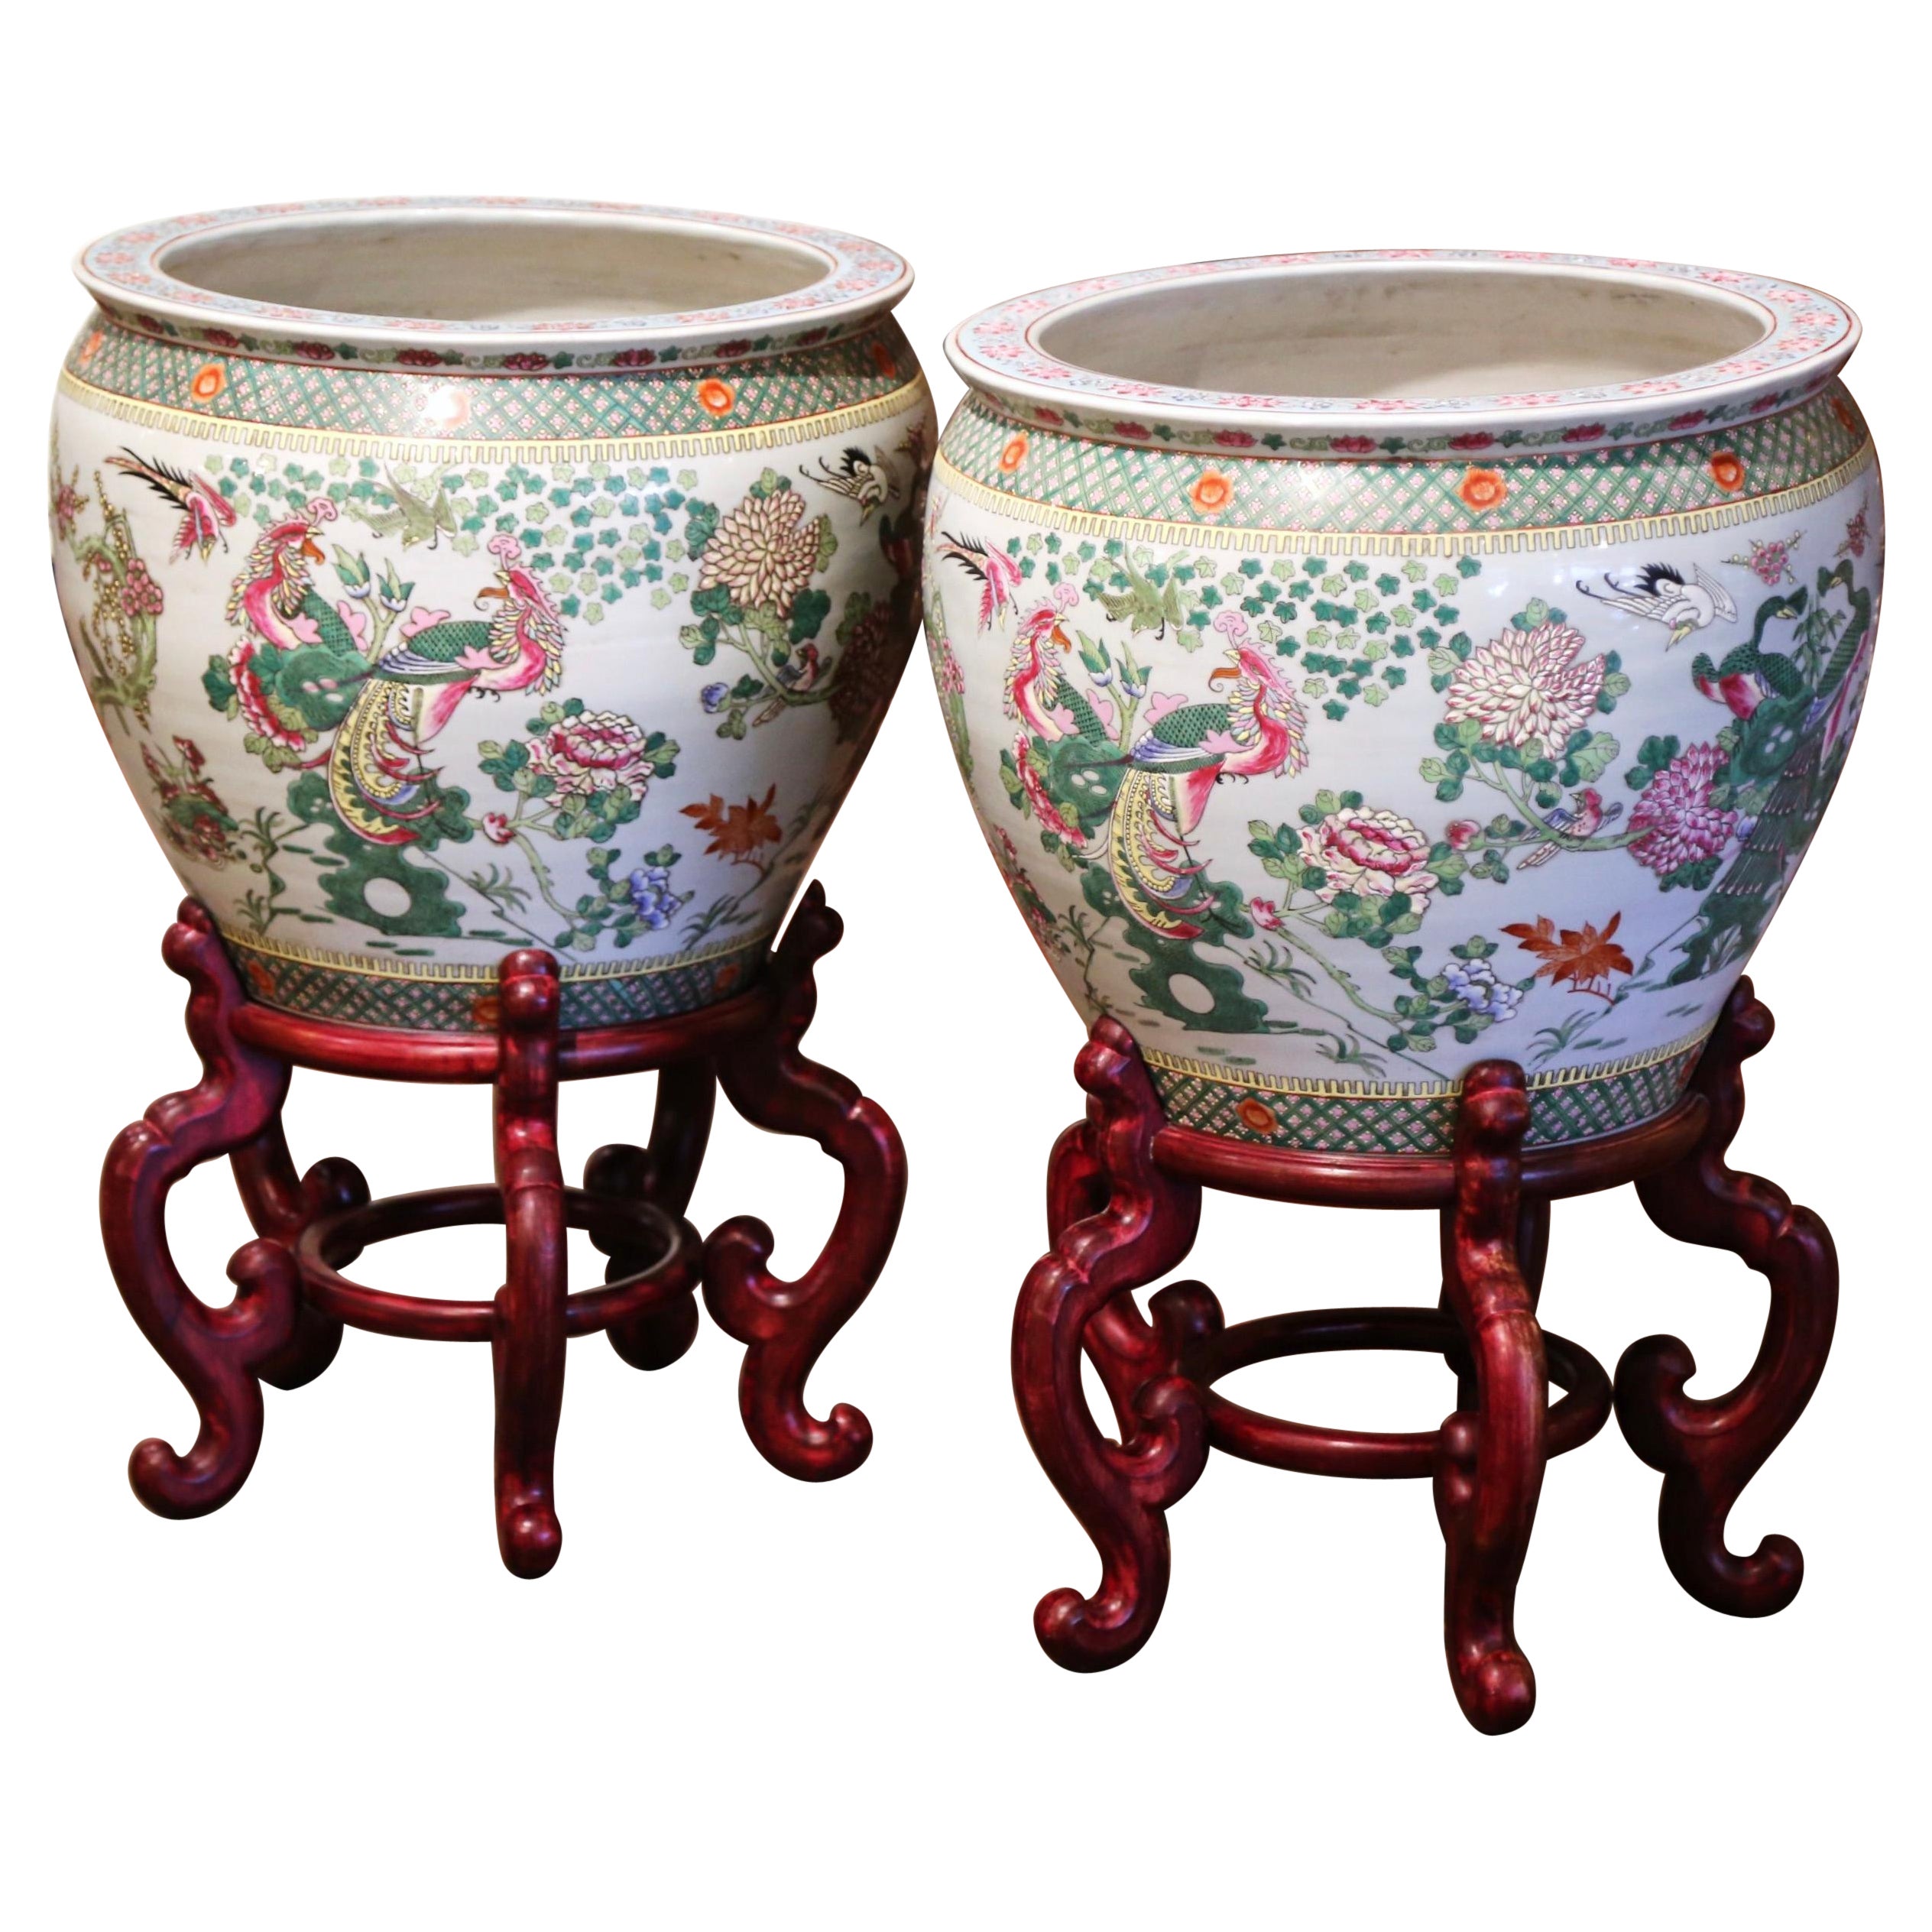 Pair of Mid-Century Chinese Painted Porcelain Fish Bowls on Carved Walnut Stands